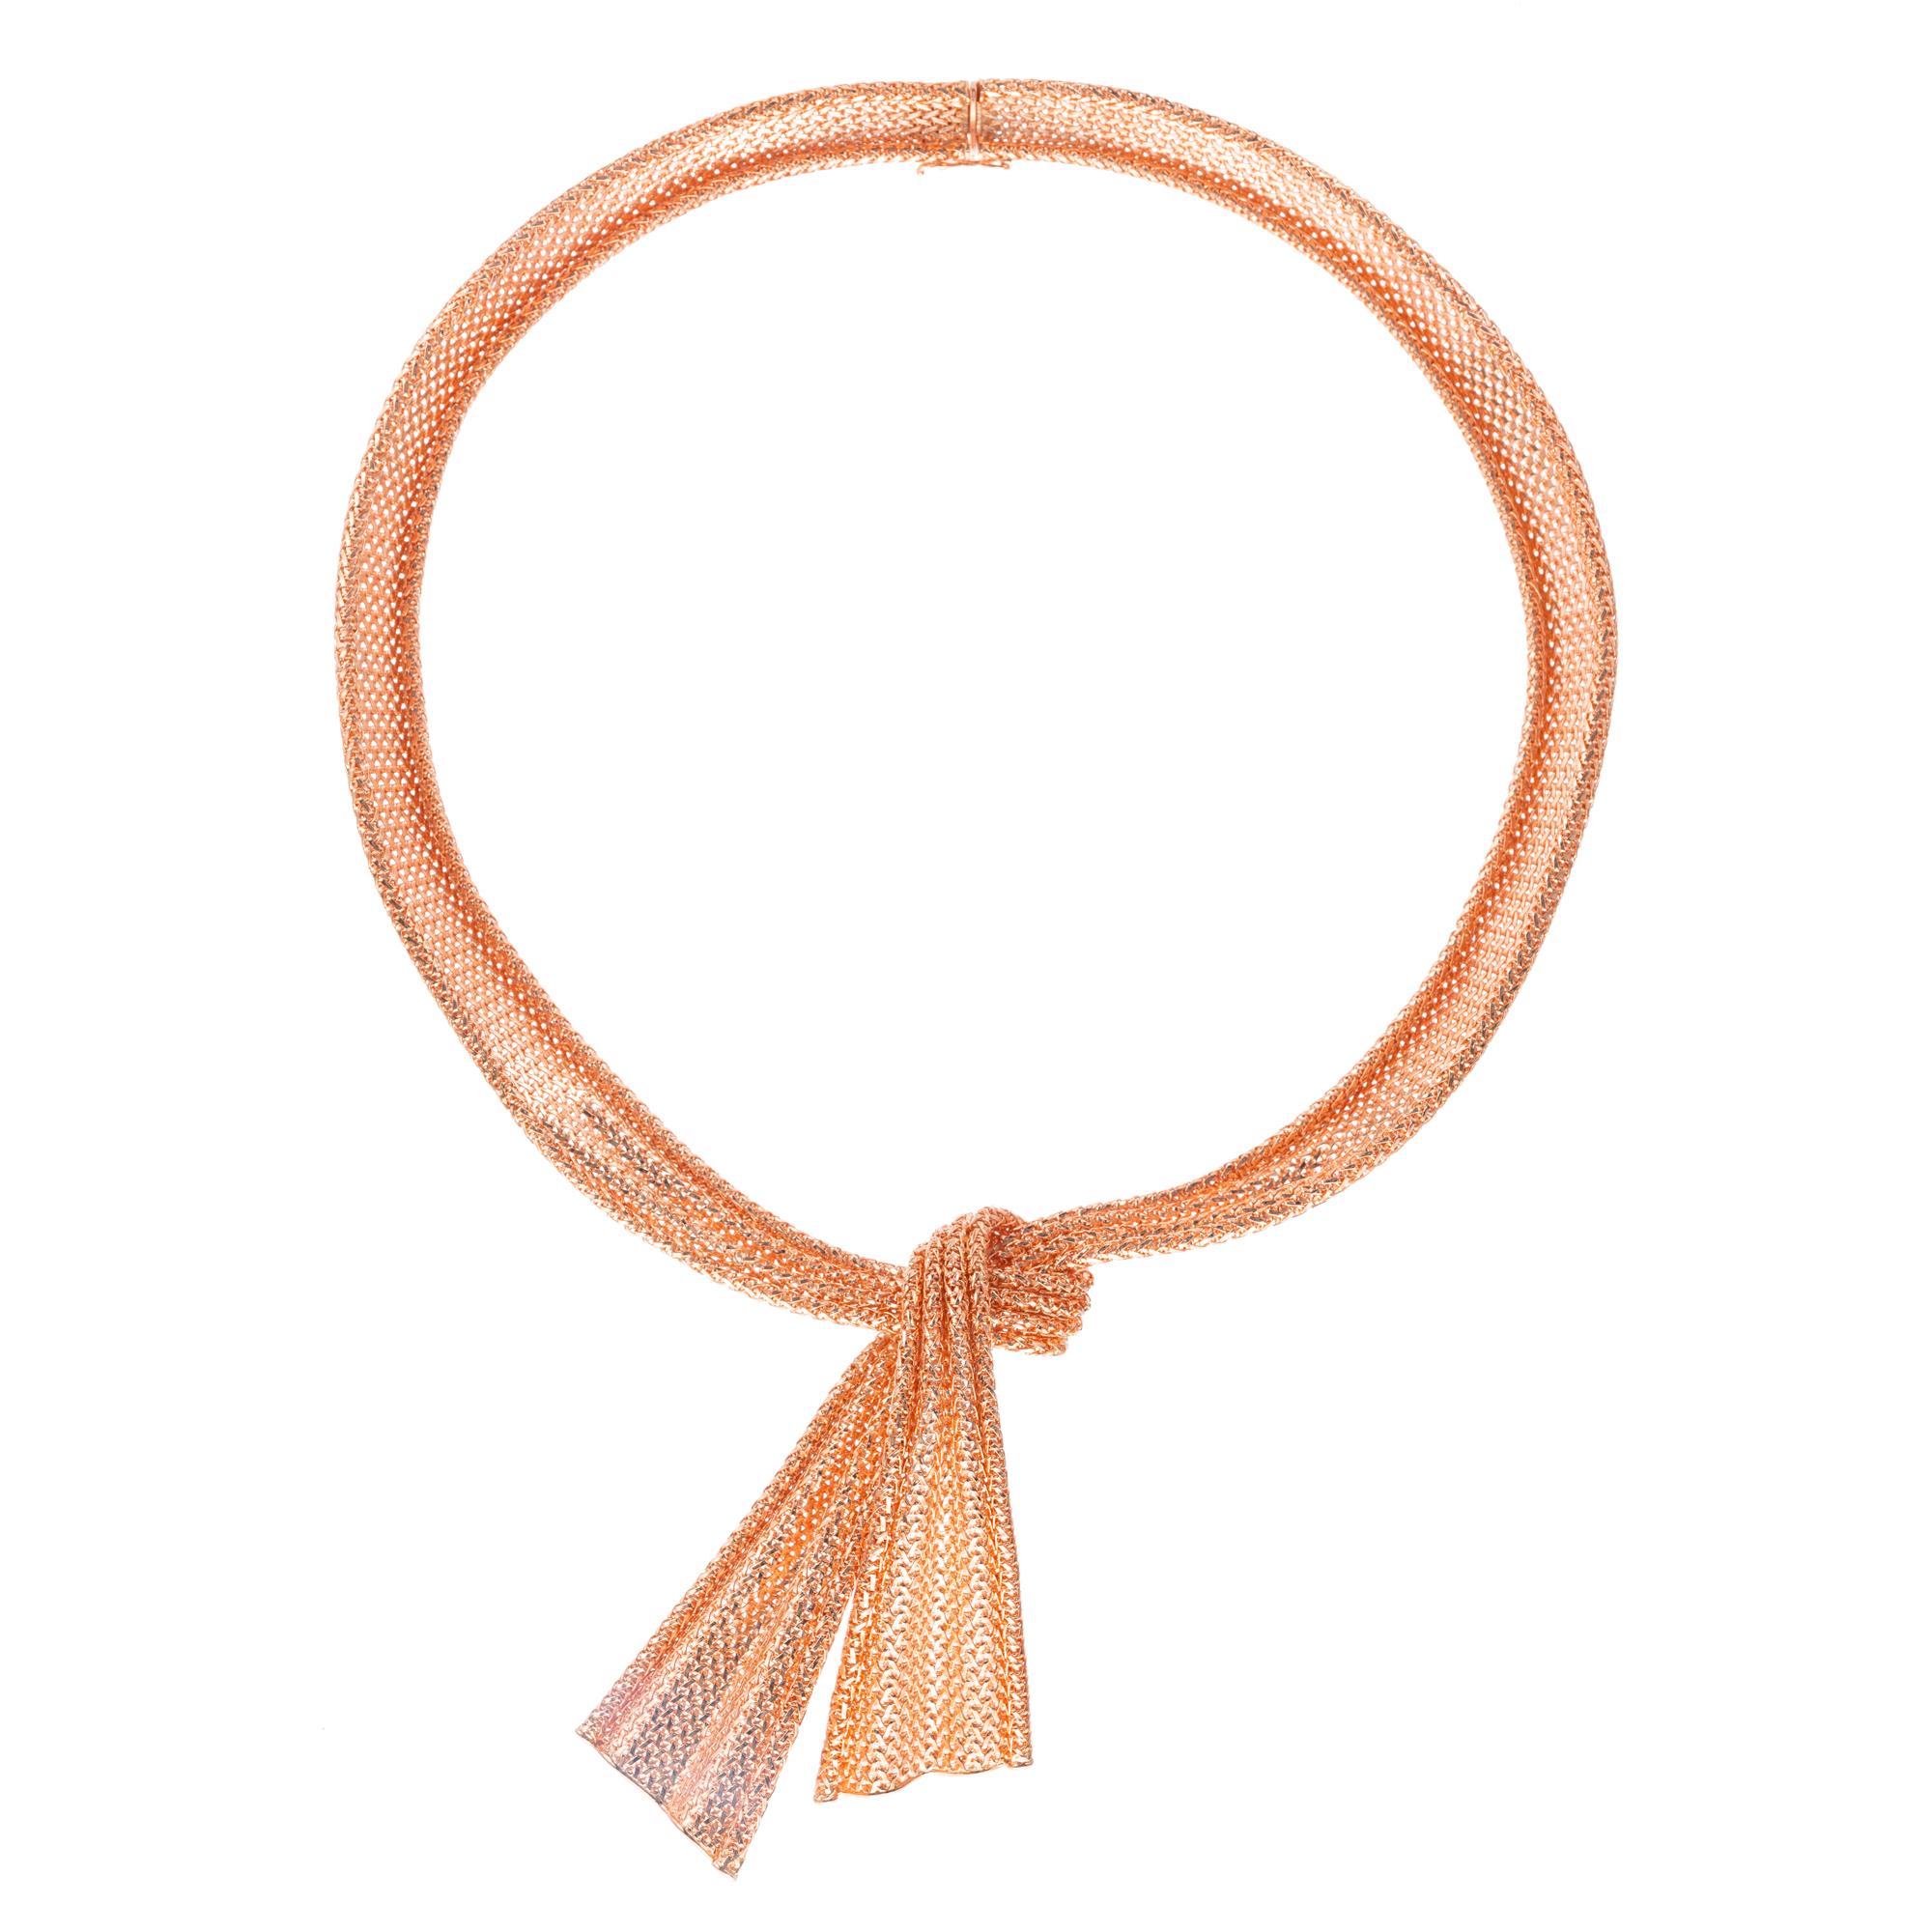 Wheat scarf design mesh 18k rose gold scarf style necklace. box lock closure and figure 8 safety catch. 

18k rose gold 
Chain: 17.25 Inches 
Stamped: 18KT
83.1 grams
Top to bottom: 78mm or 3 Inches
Width: 5.5mm or 2.25 Inches
Depth or thickness: